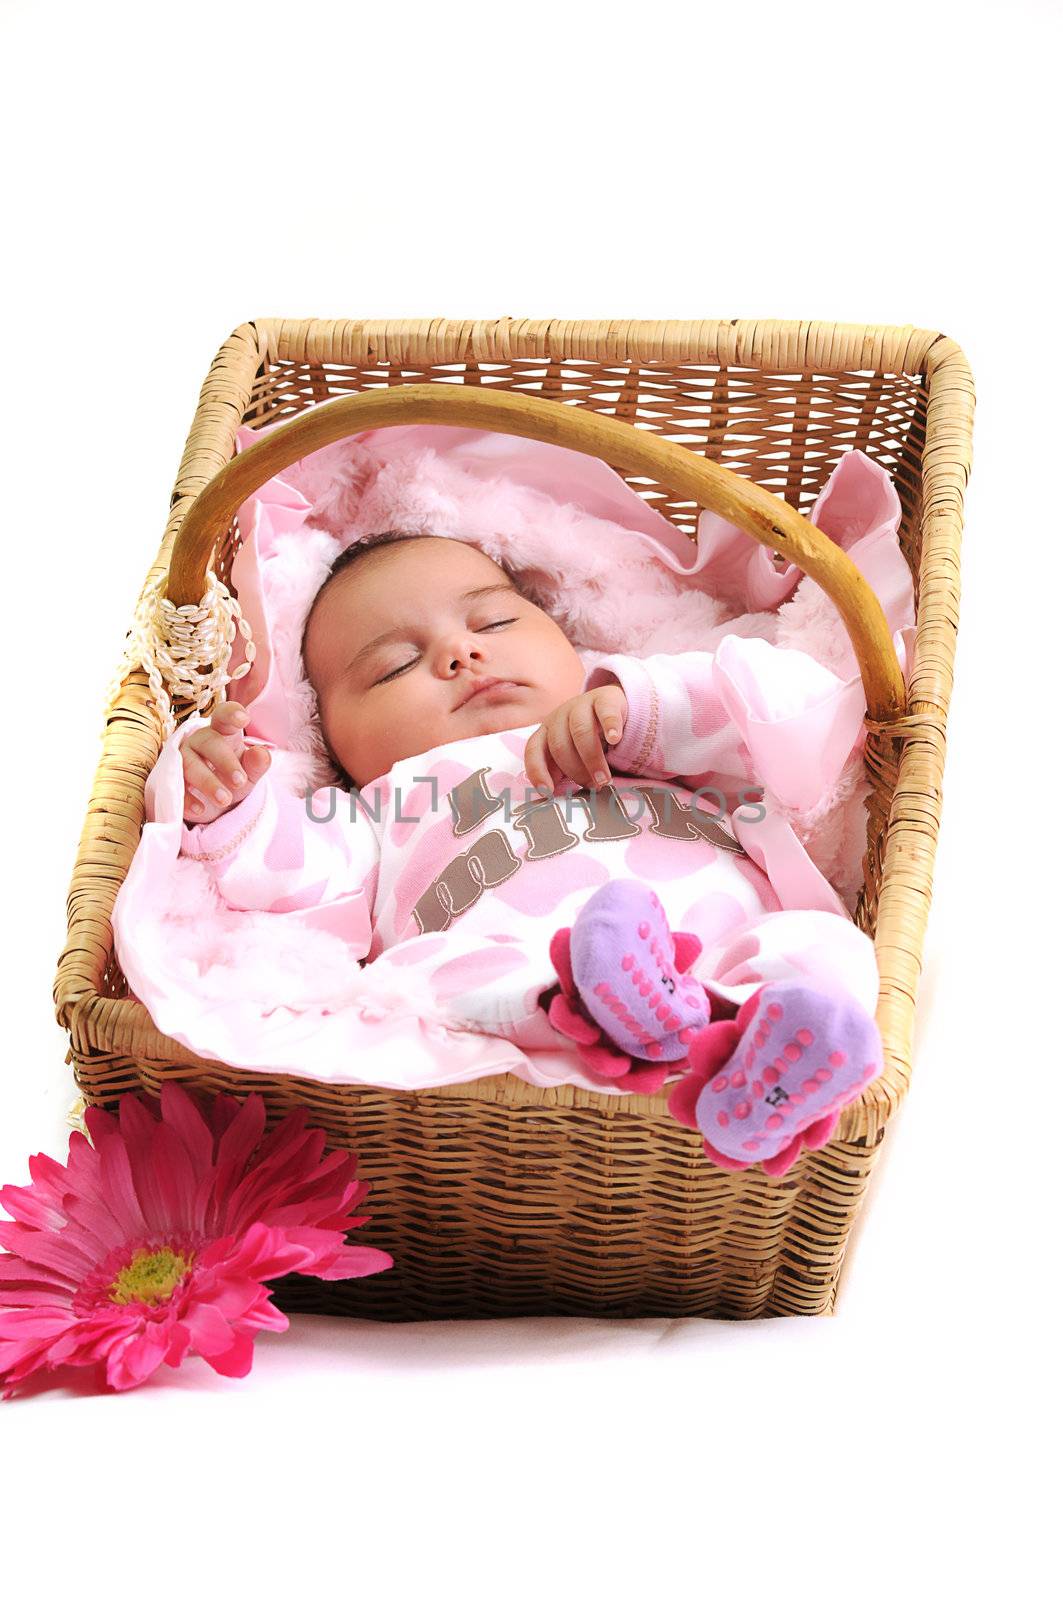 baby girl laying in a brown basket, white beads and big pink flower